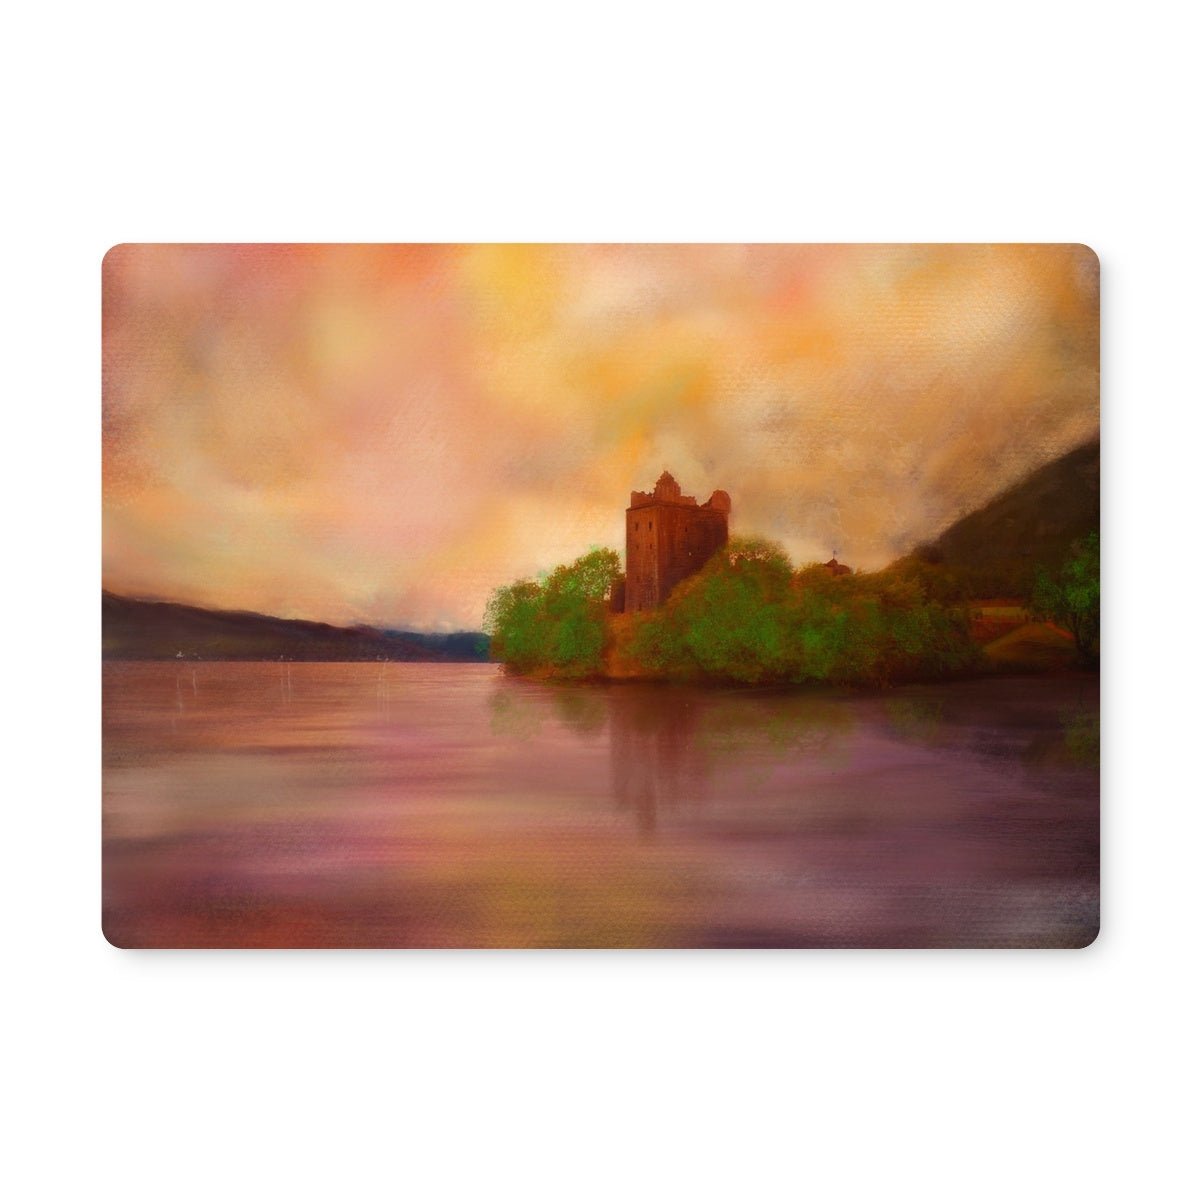 Urquhart Castle Art Gifts Placemat-Placemats-Scottish Castles Art Gallery-2 Placemats-Paintings, Prints, Homeware, Art Gifts From Scotland By Scottish Artist Kevin Hunter